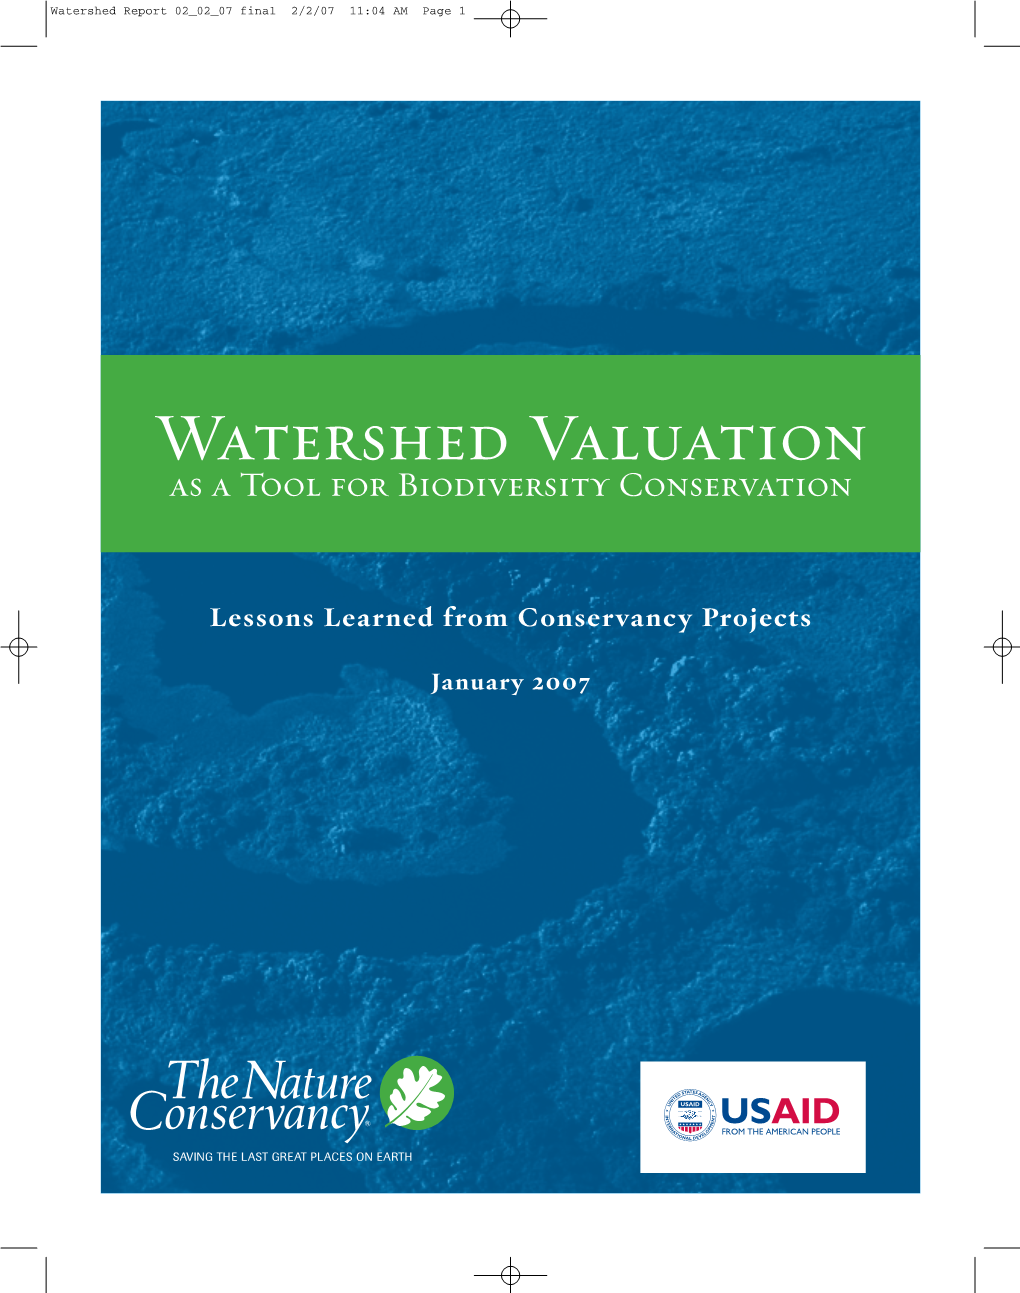 Watershed Valuation As a Tool for Biodiversity Conservation